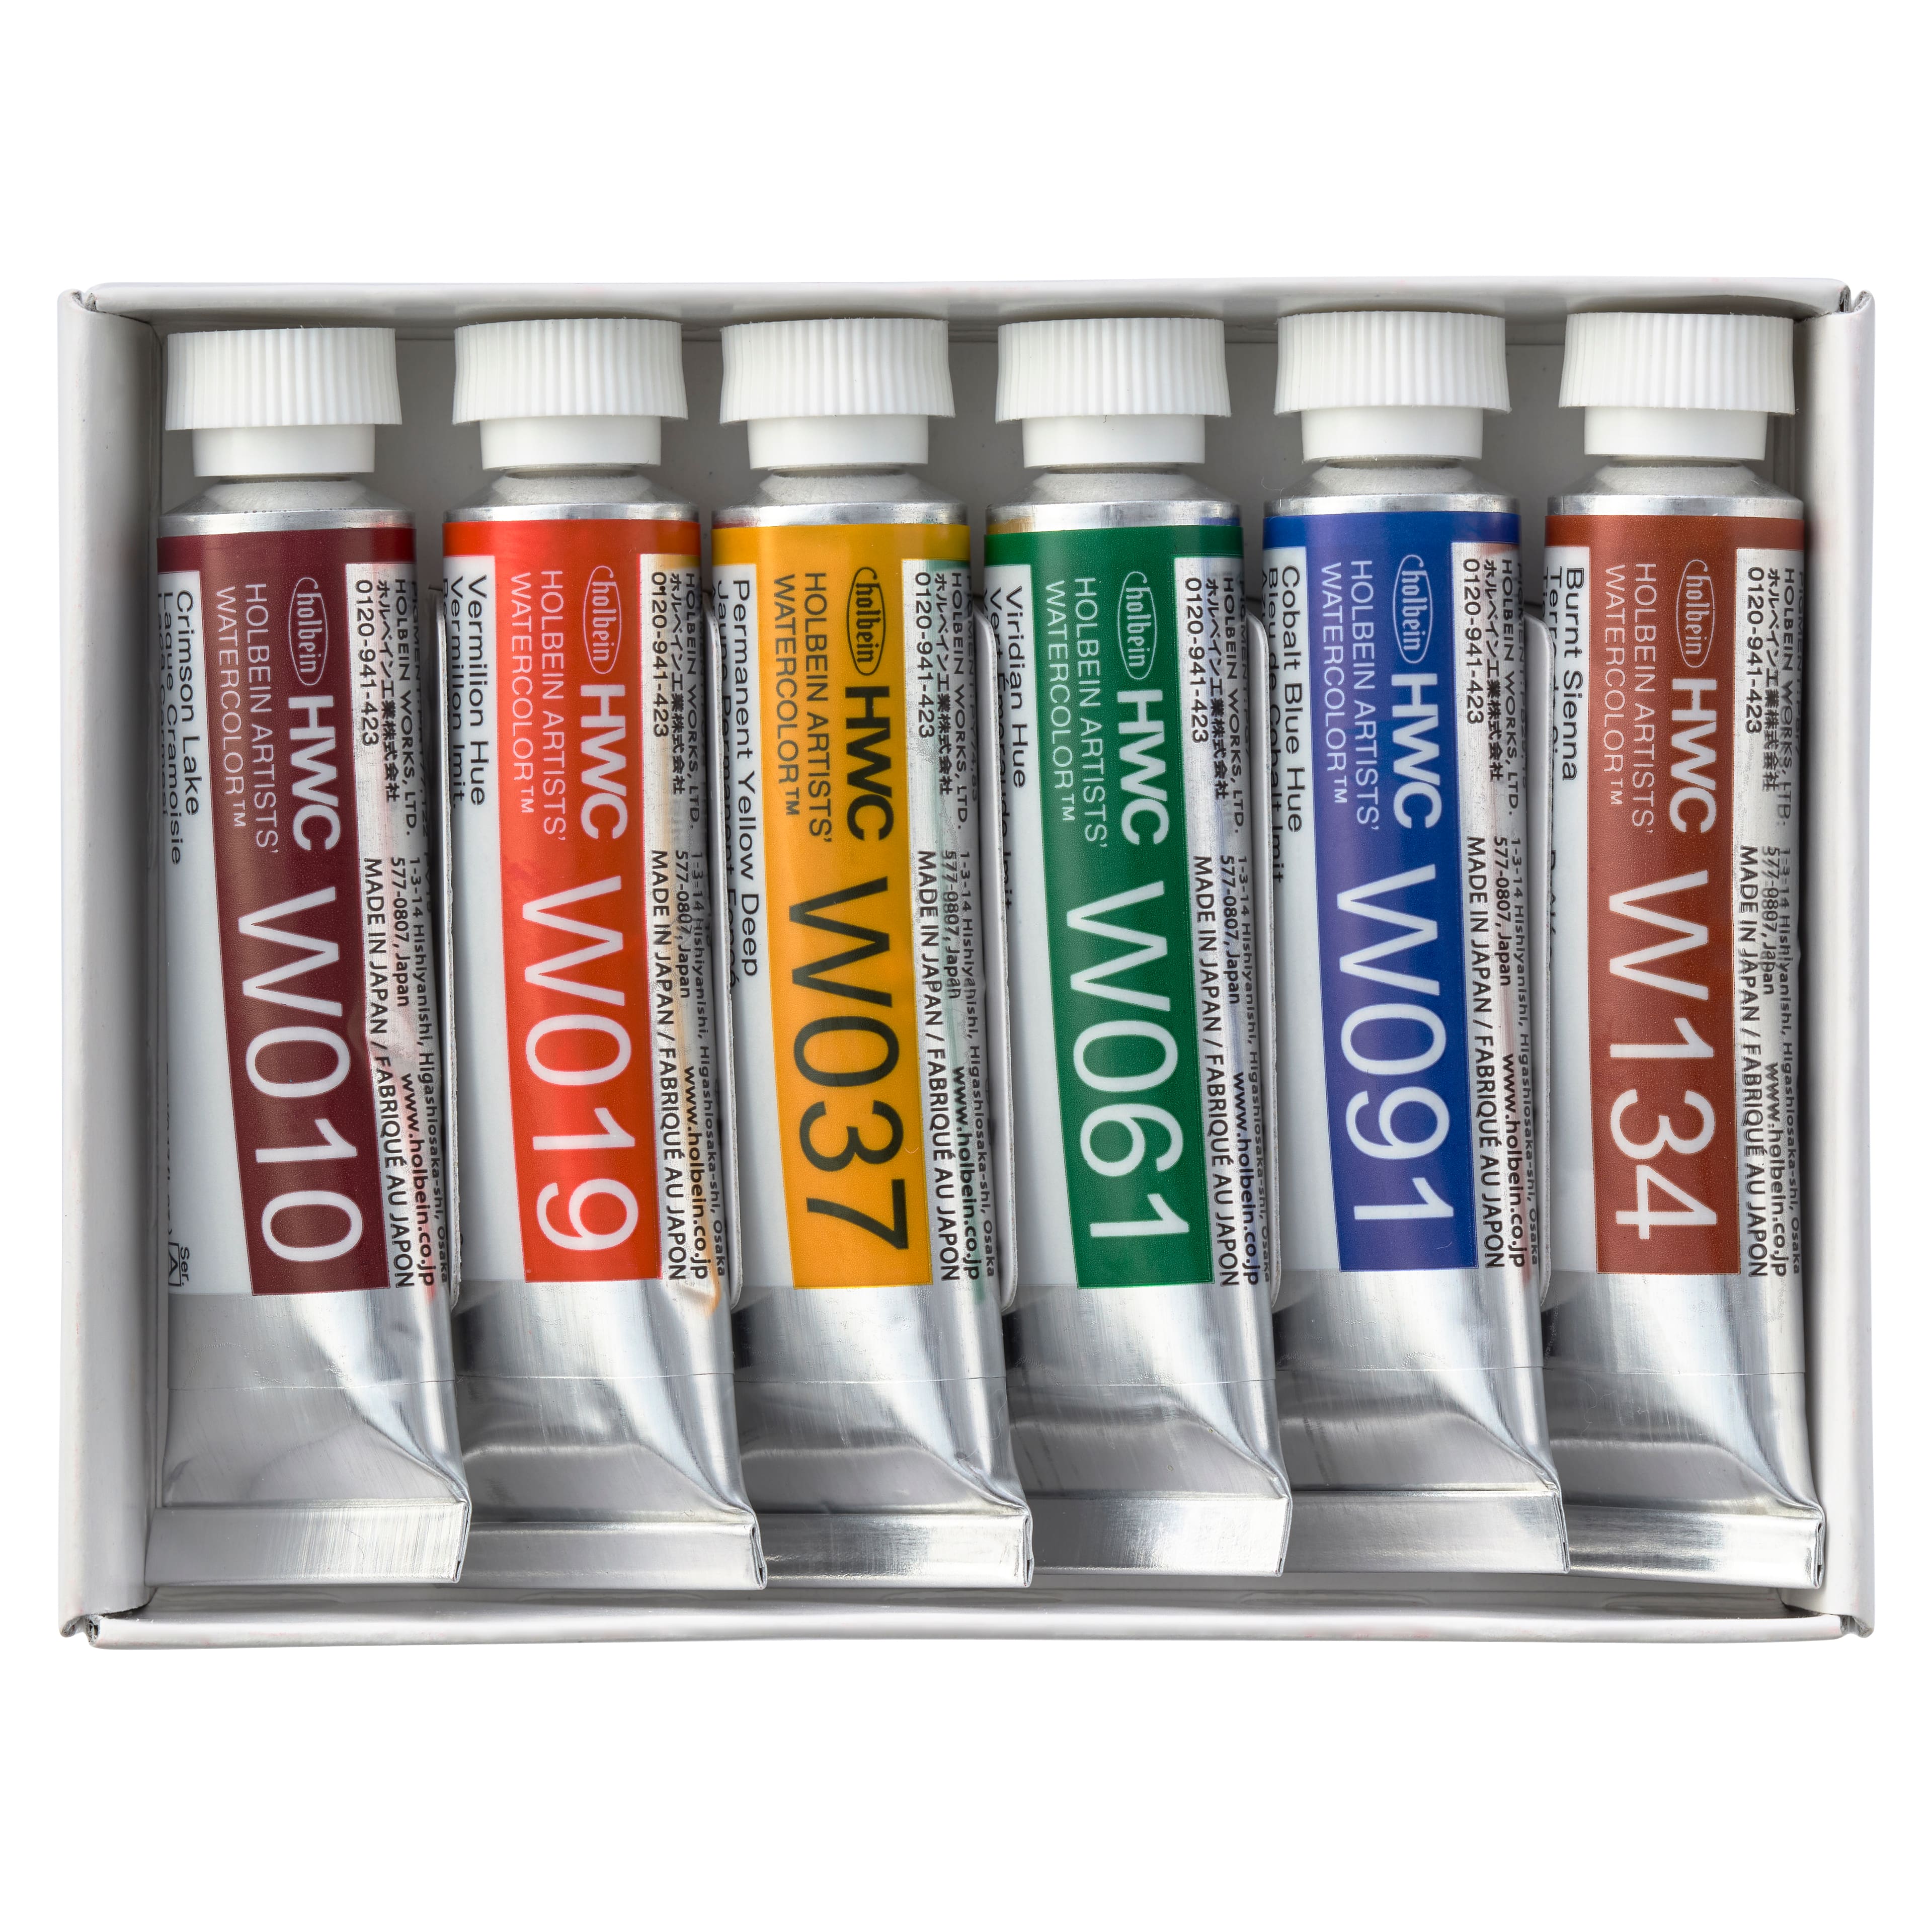 Holbein Artists' Watercolors 12 x 5ml Set